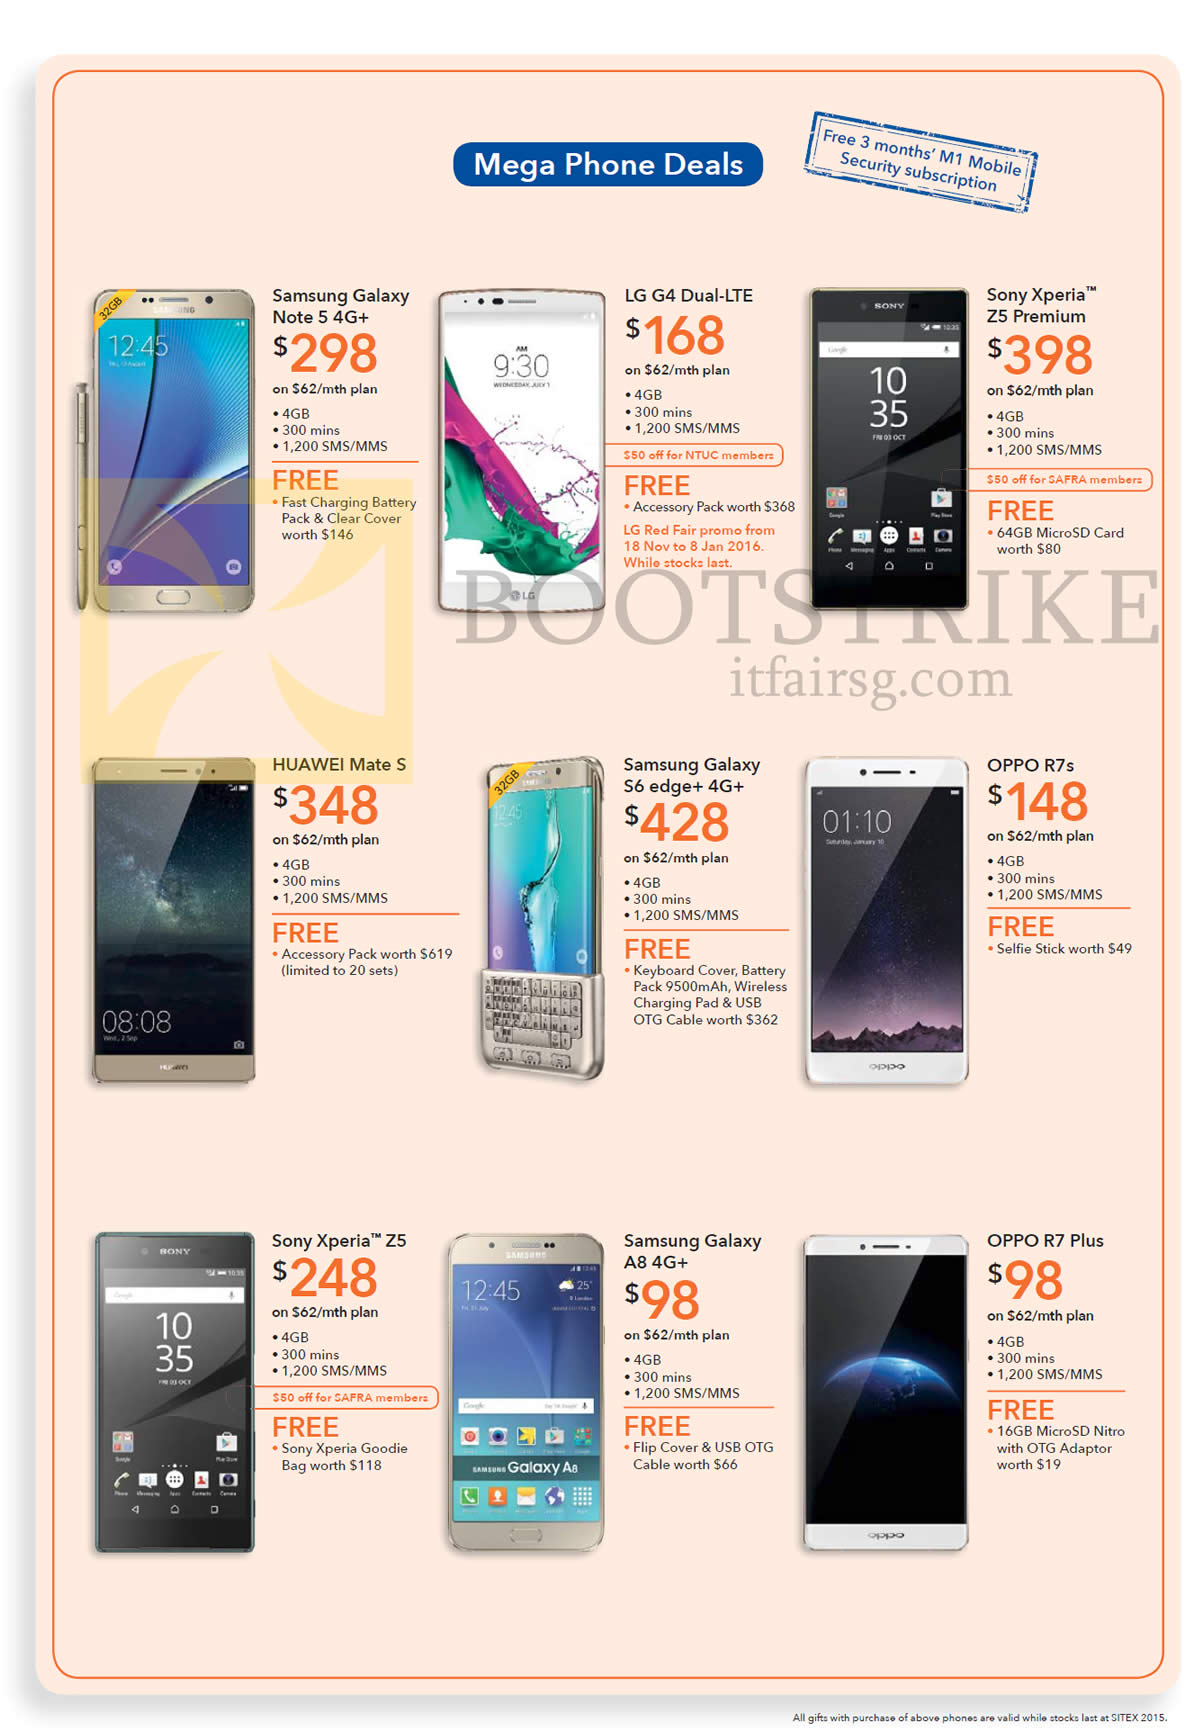 SITEX 2015 price list image brochure of M1 Mobile Phones Samsung Galaxy Note 5 S6 Edge A8, LG G4, Sony Xperia Z5, Huawei Mate S, Sony Xperia Z5, Oppo R7 R7s Plus